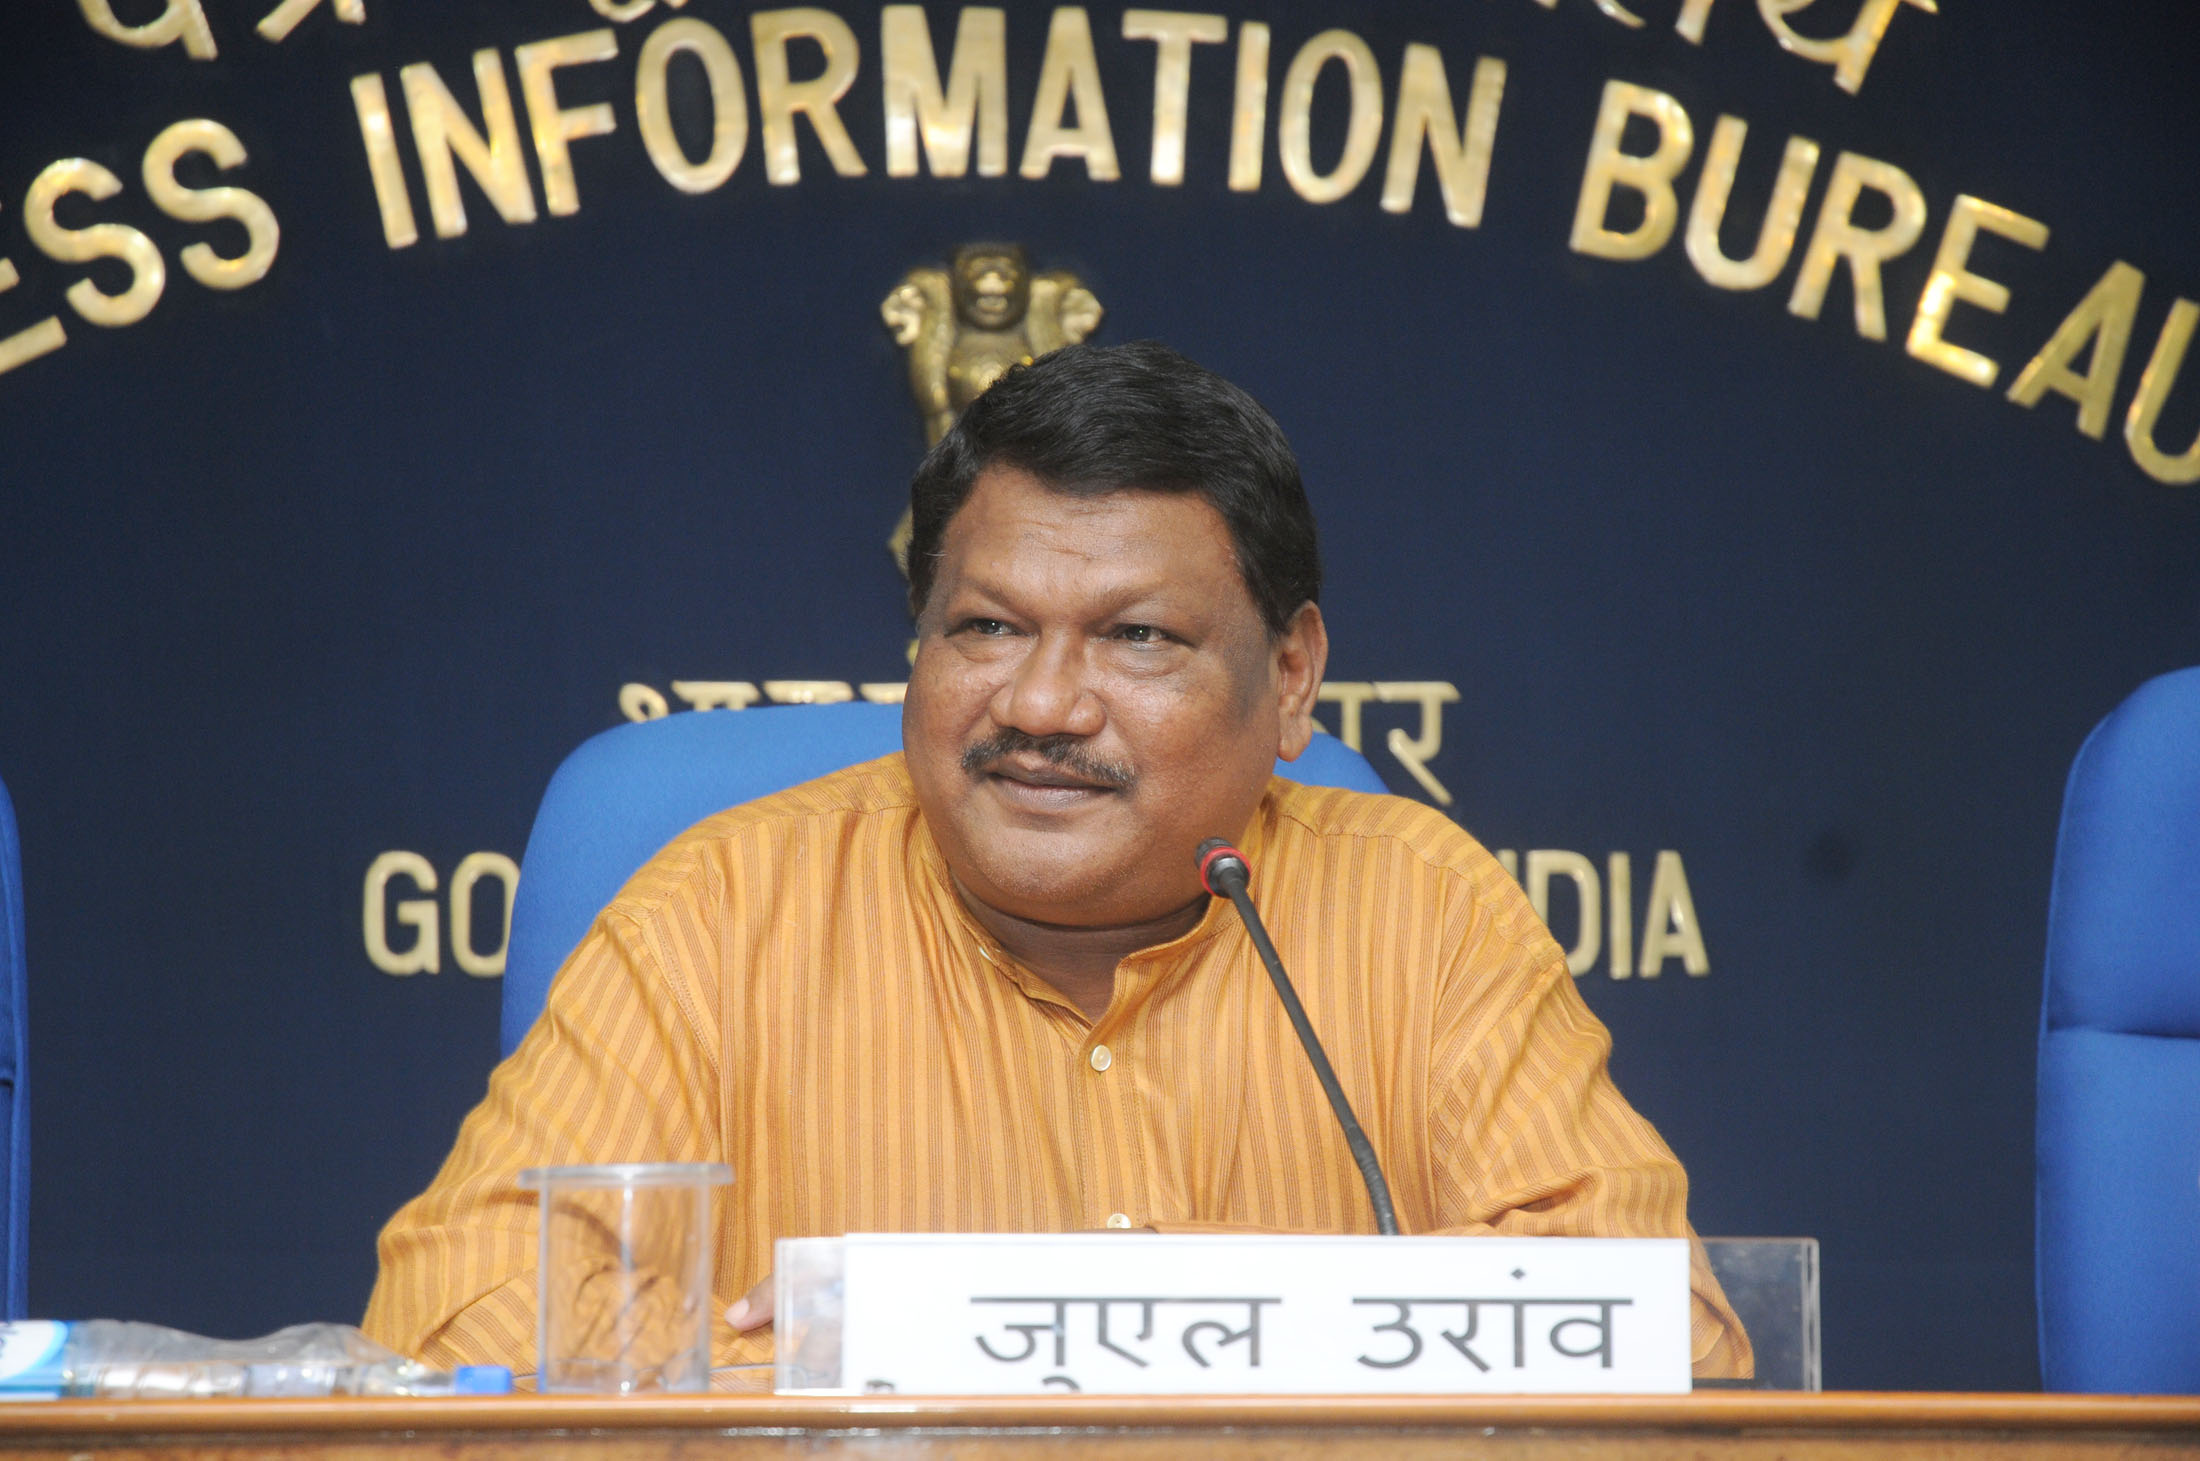 The Union Minister for Tribal Affairs, Shri Jual Oram briefing the media about the initiatives and achievements of his Ministry, in New Delhi on September 26, 2014.